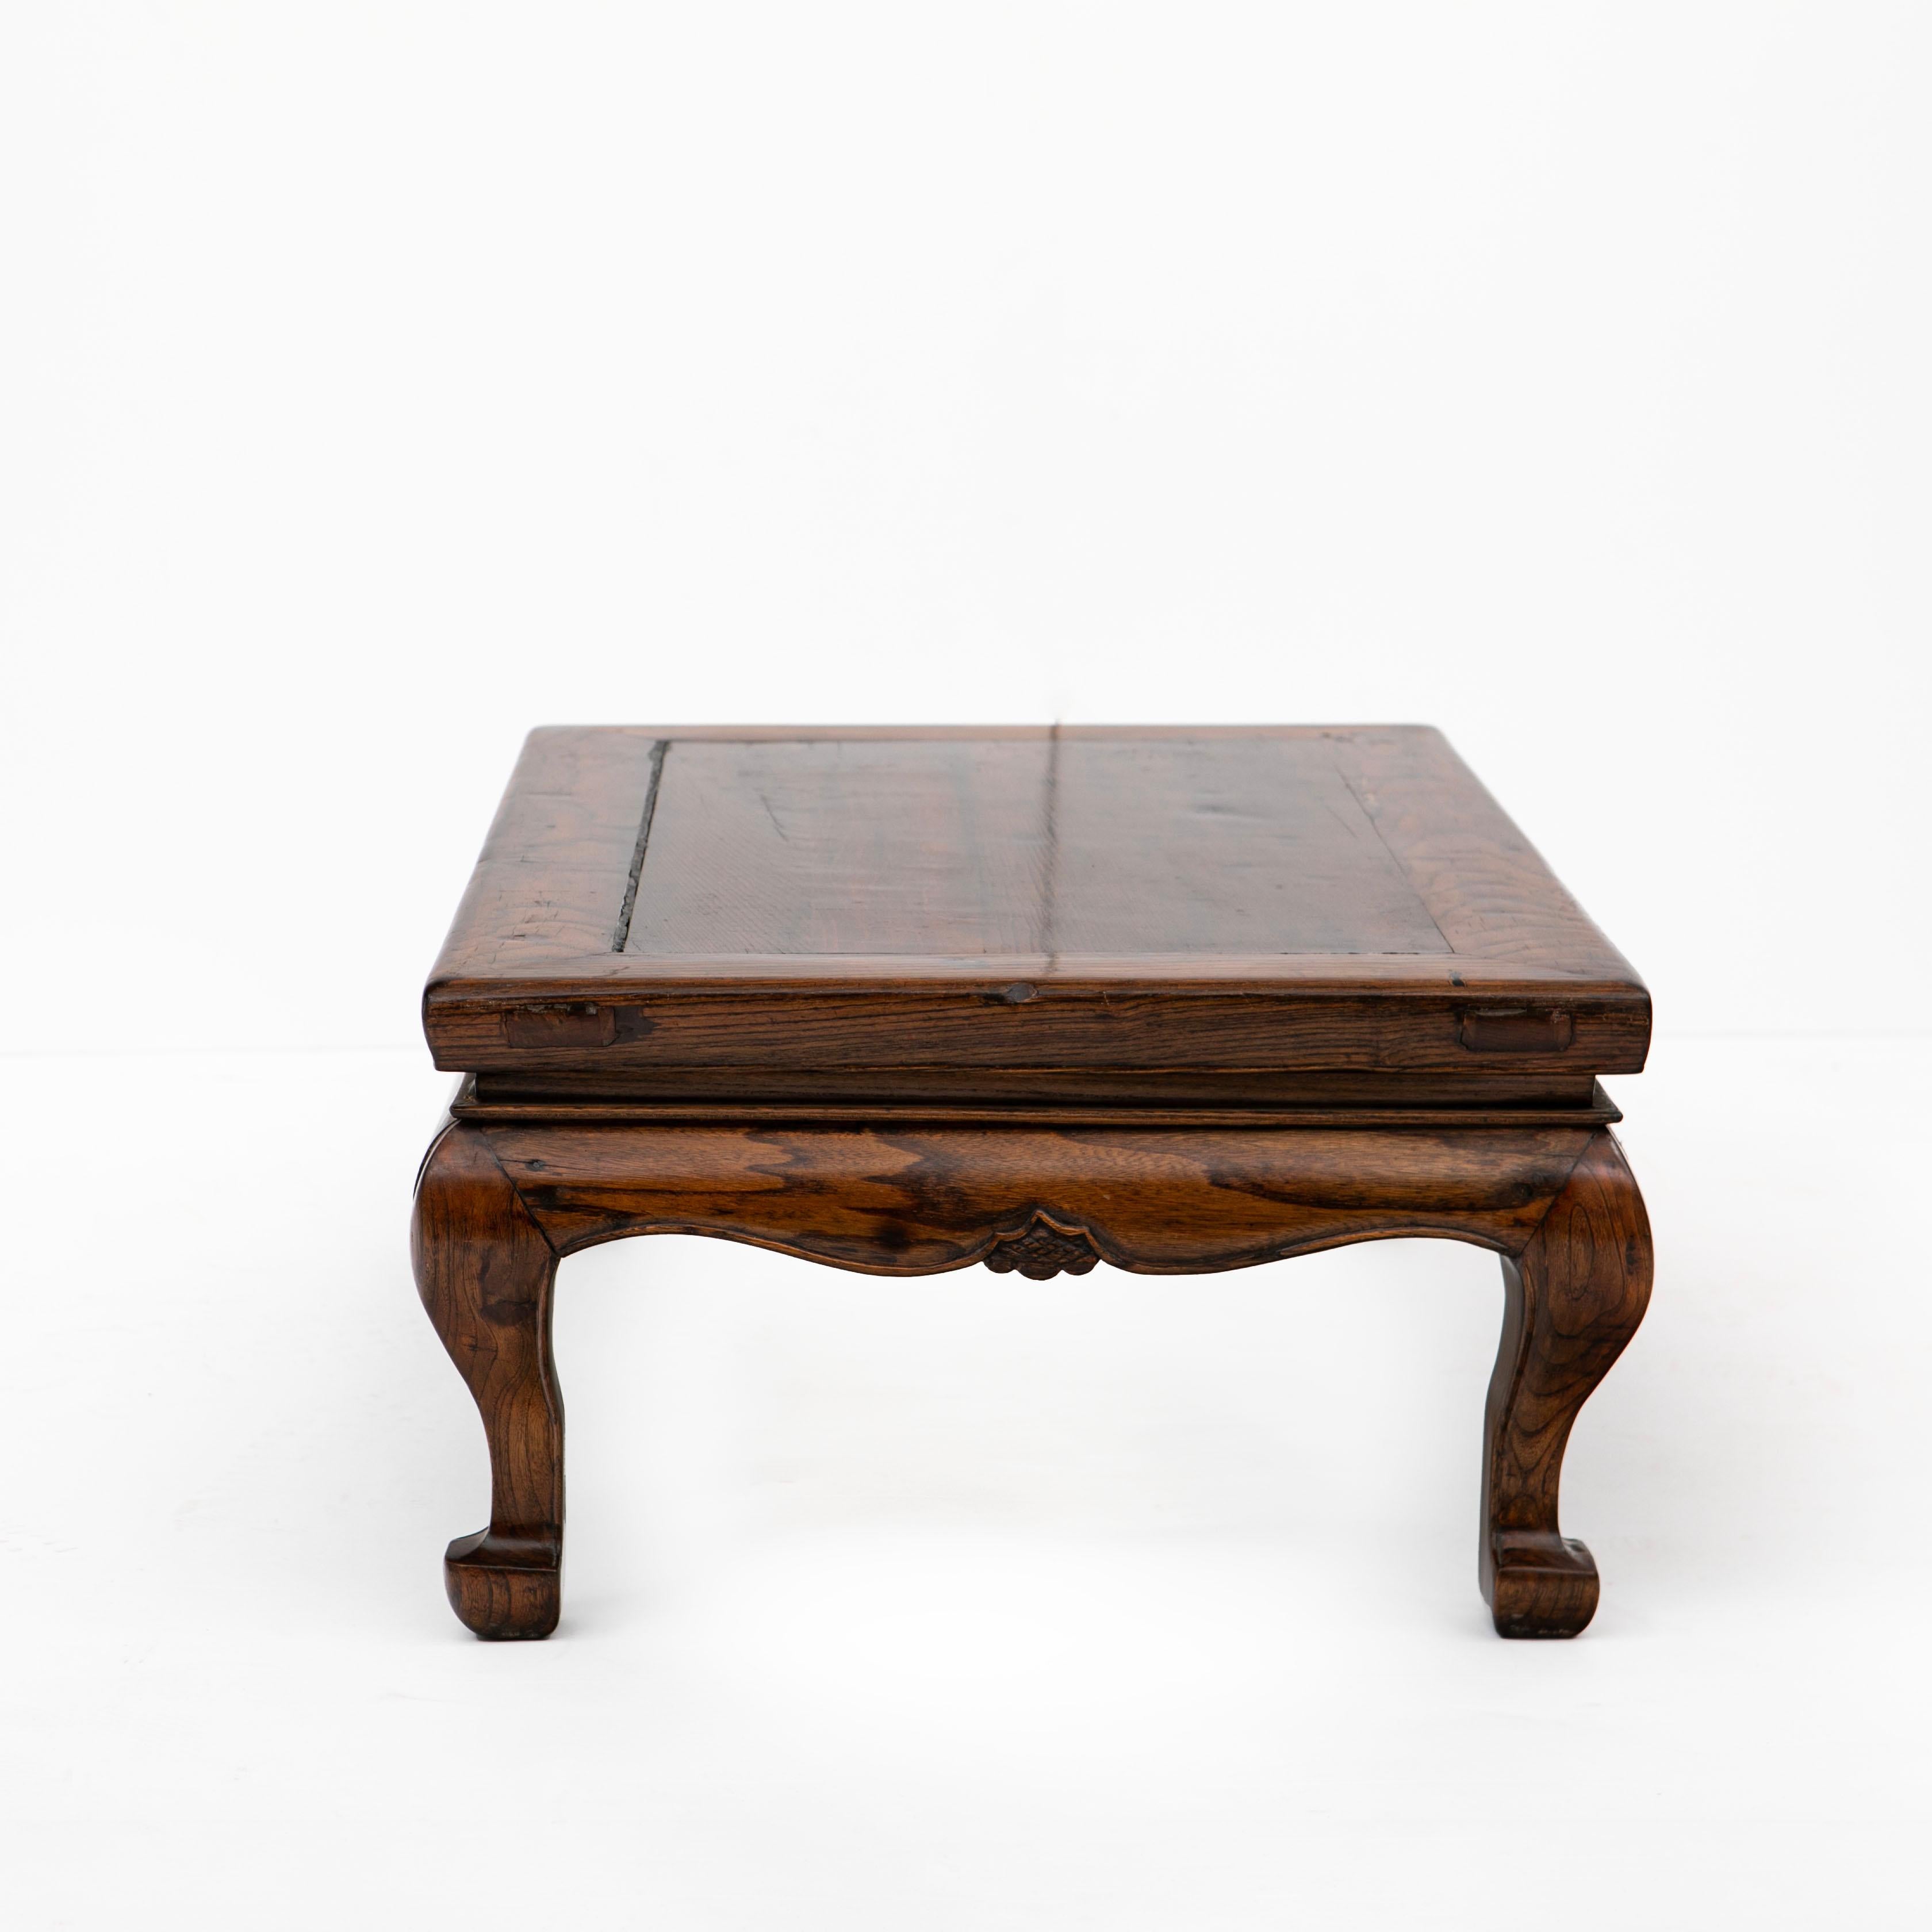 20th Century Chinese Mid 19th Century Qing Dynasty Kang / Low Table For Sale